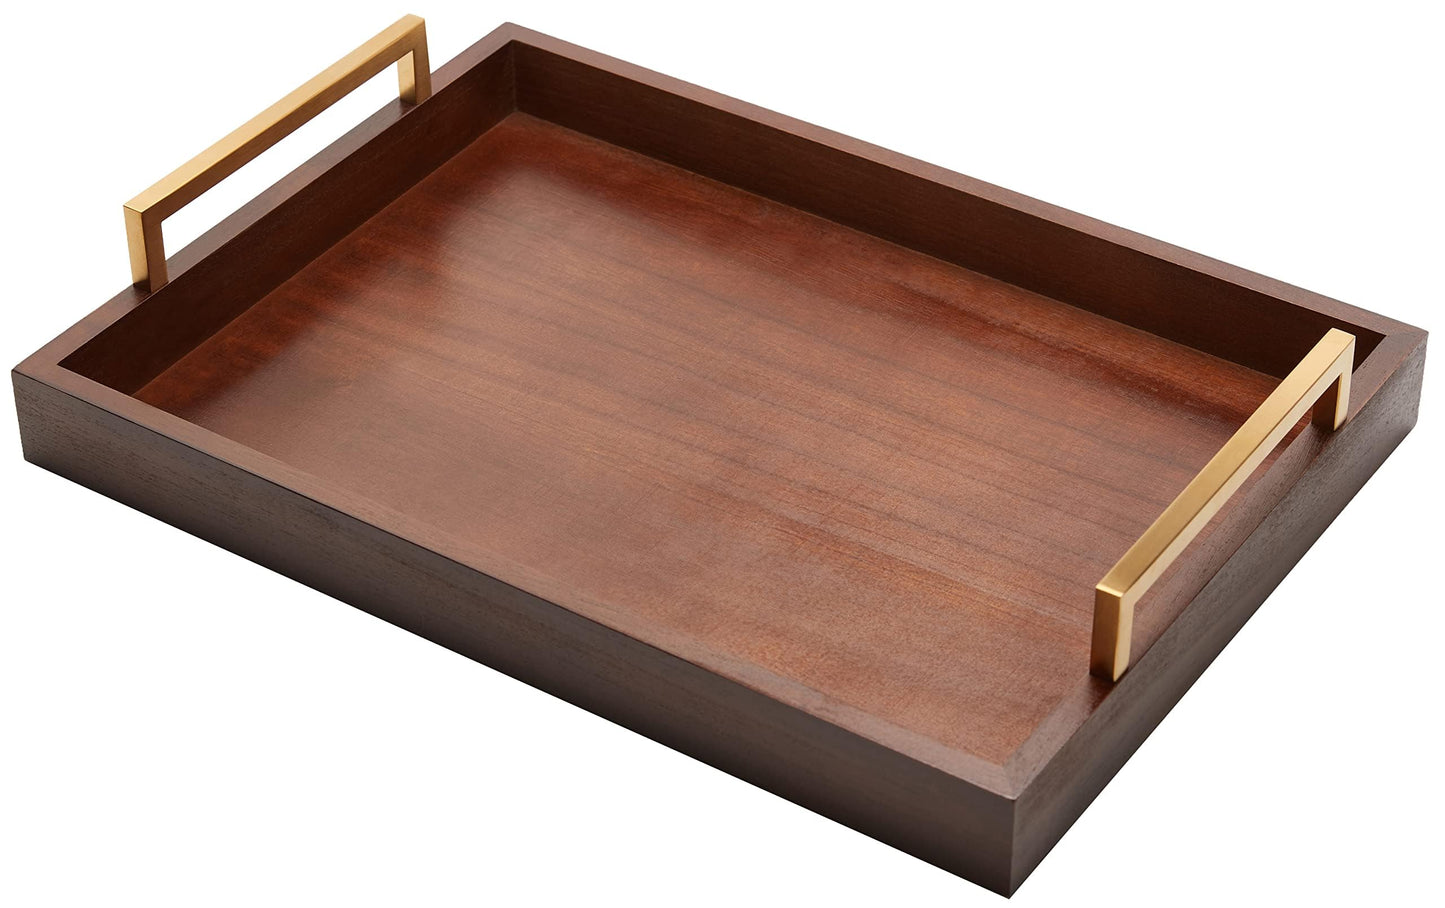 Wooden Tray Serving Decorative Home Decor with Handles Mordern Couch Tray Ottoman Centerpiece for Coffee Table Wood Tray Room Decor Candle Display